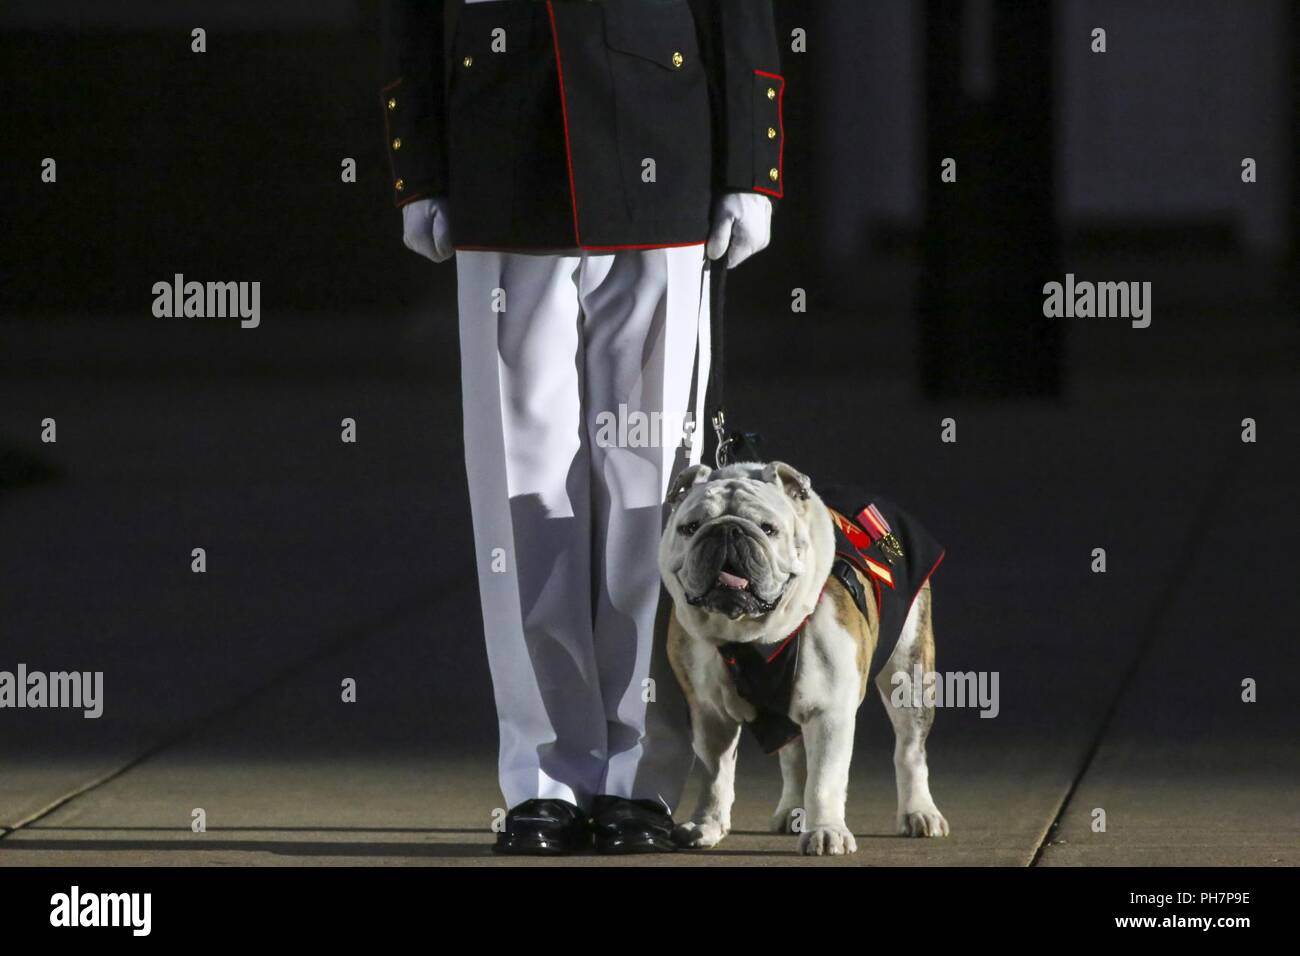 Sergeant Chesty XIV stands at attention during a Friday Evening Parade at Marine Barracks Washington D.C., June 29, 2018. The guest of honor for the ceremony was the Under Secretary of the Navy, Thomas B. Modly, and the hosting official was the Assistant Commandant of the Marine Corps, Gen. Glenn M. Walters. Stock Photo